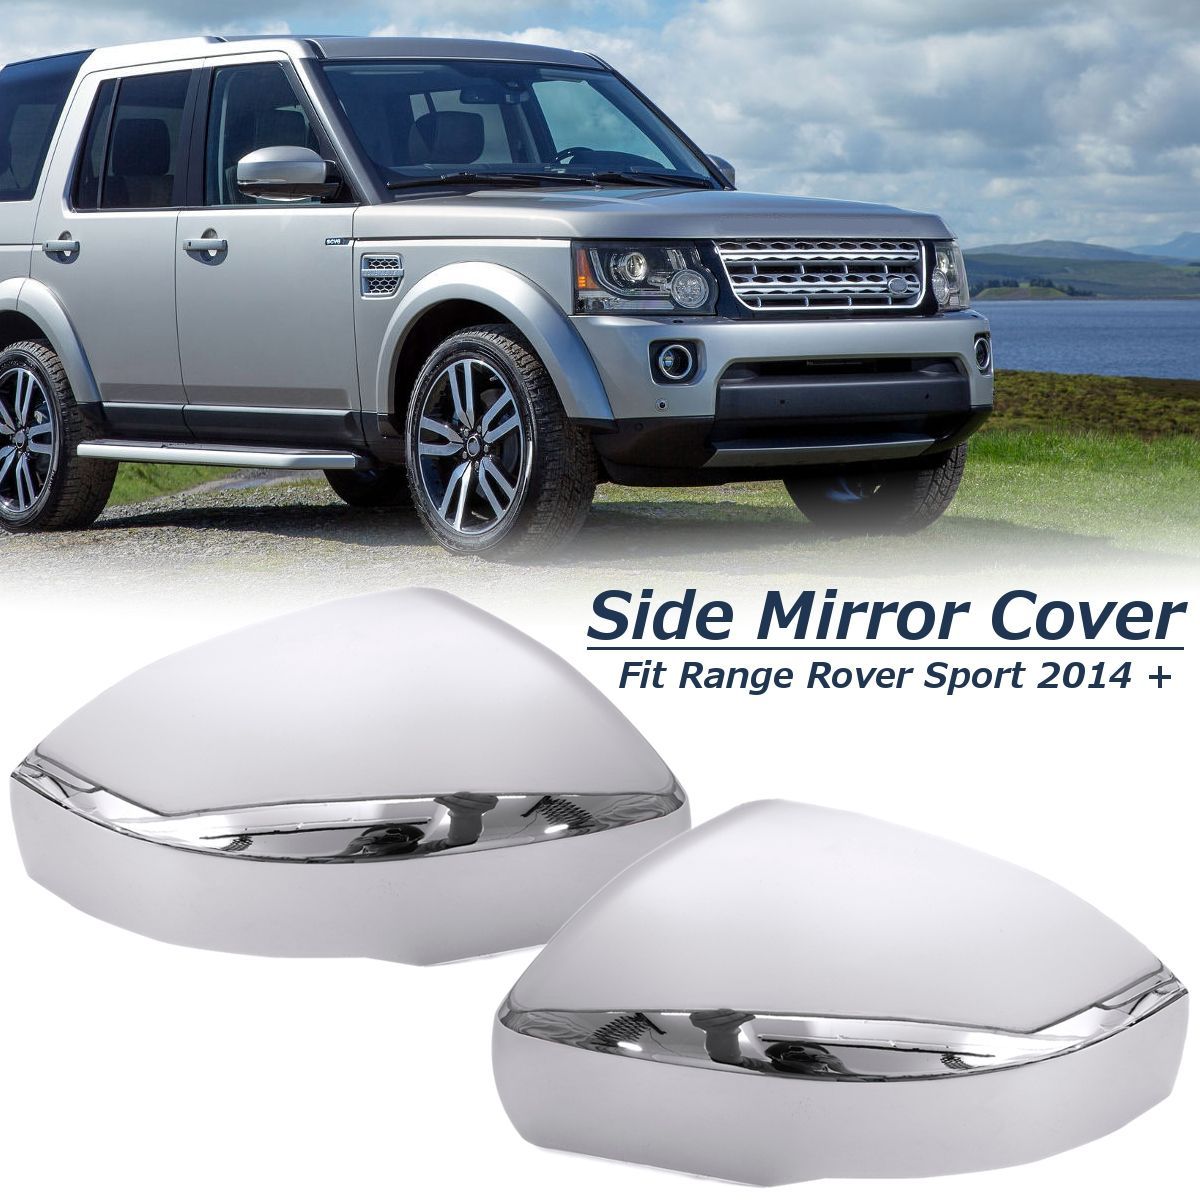 Car-LeftRight-Rearview-Mirror-Cover-White-for-Range-Rover-Sport-2014-1639794